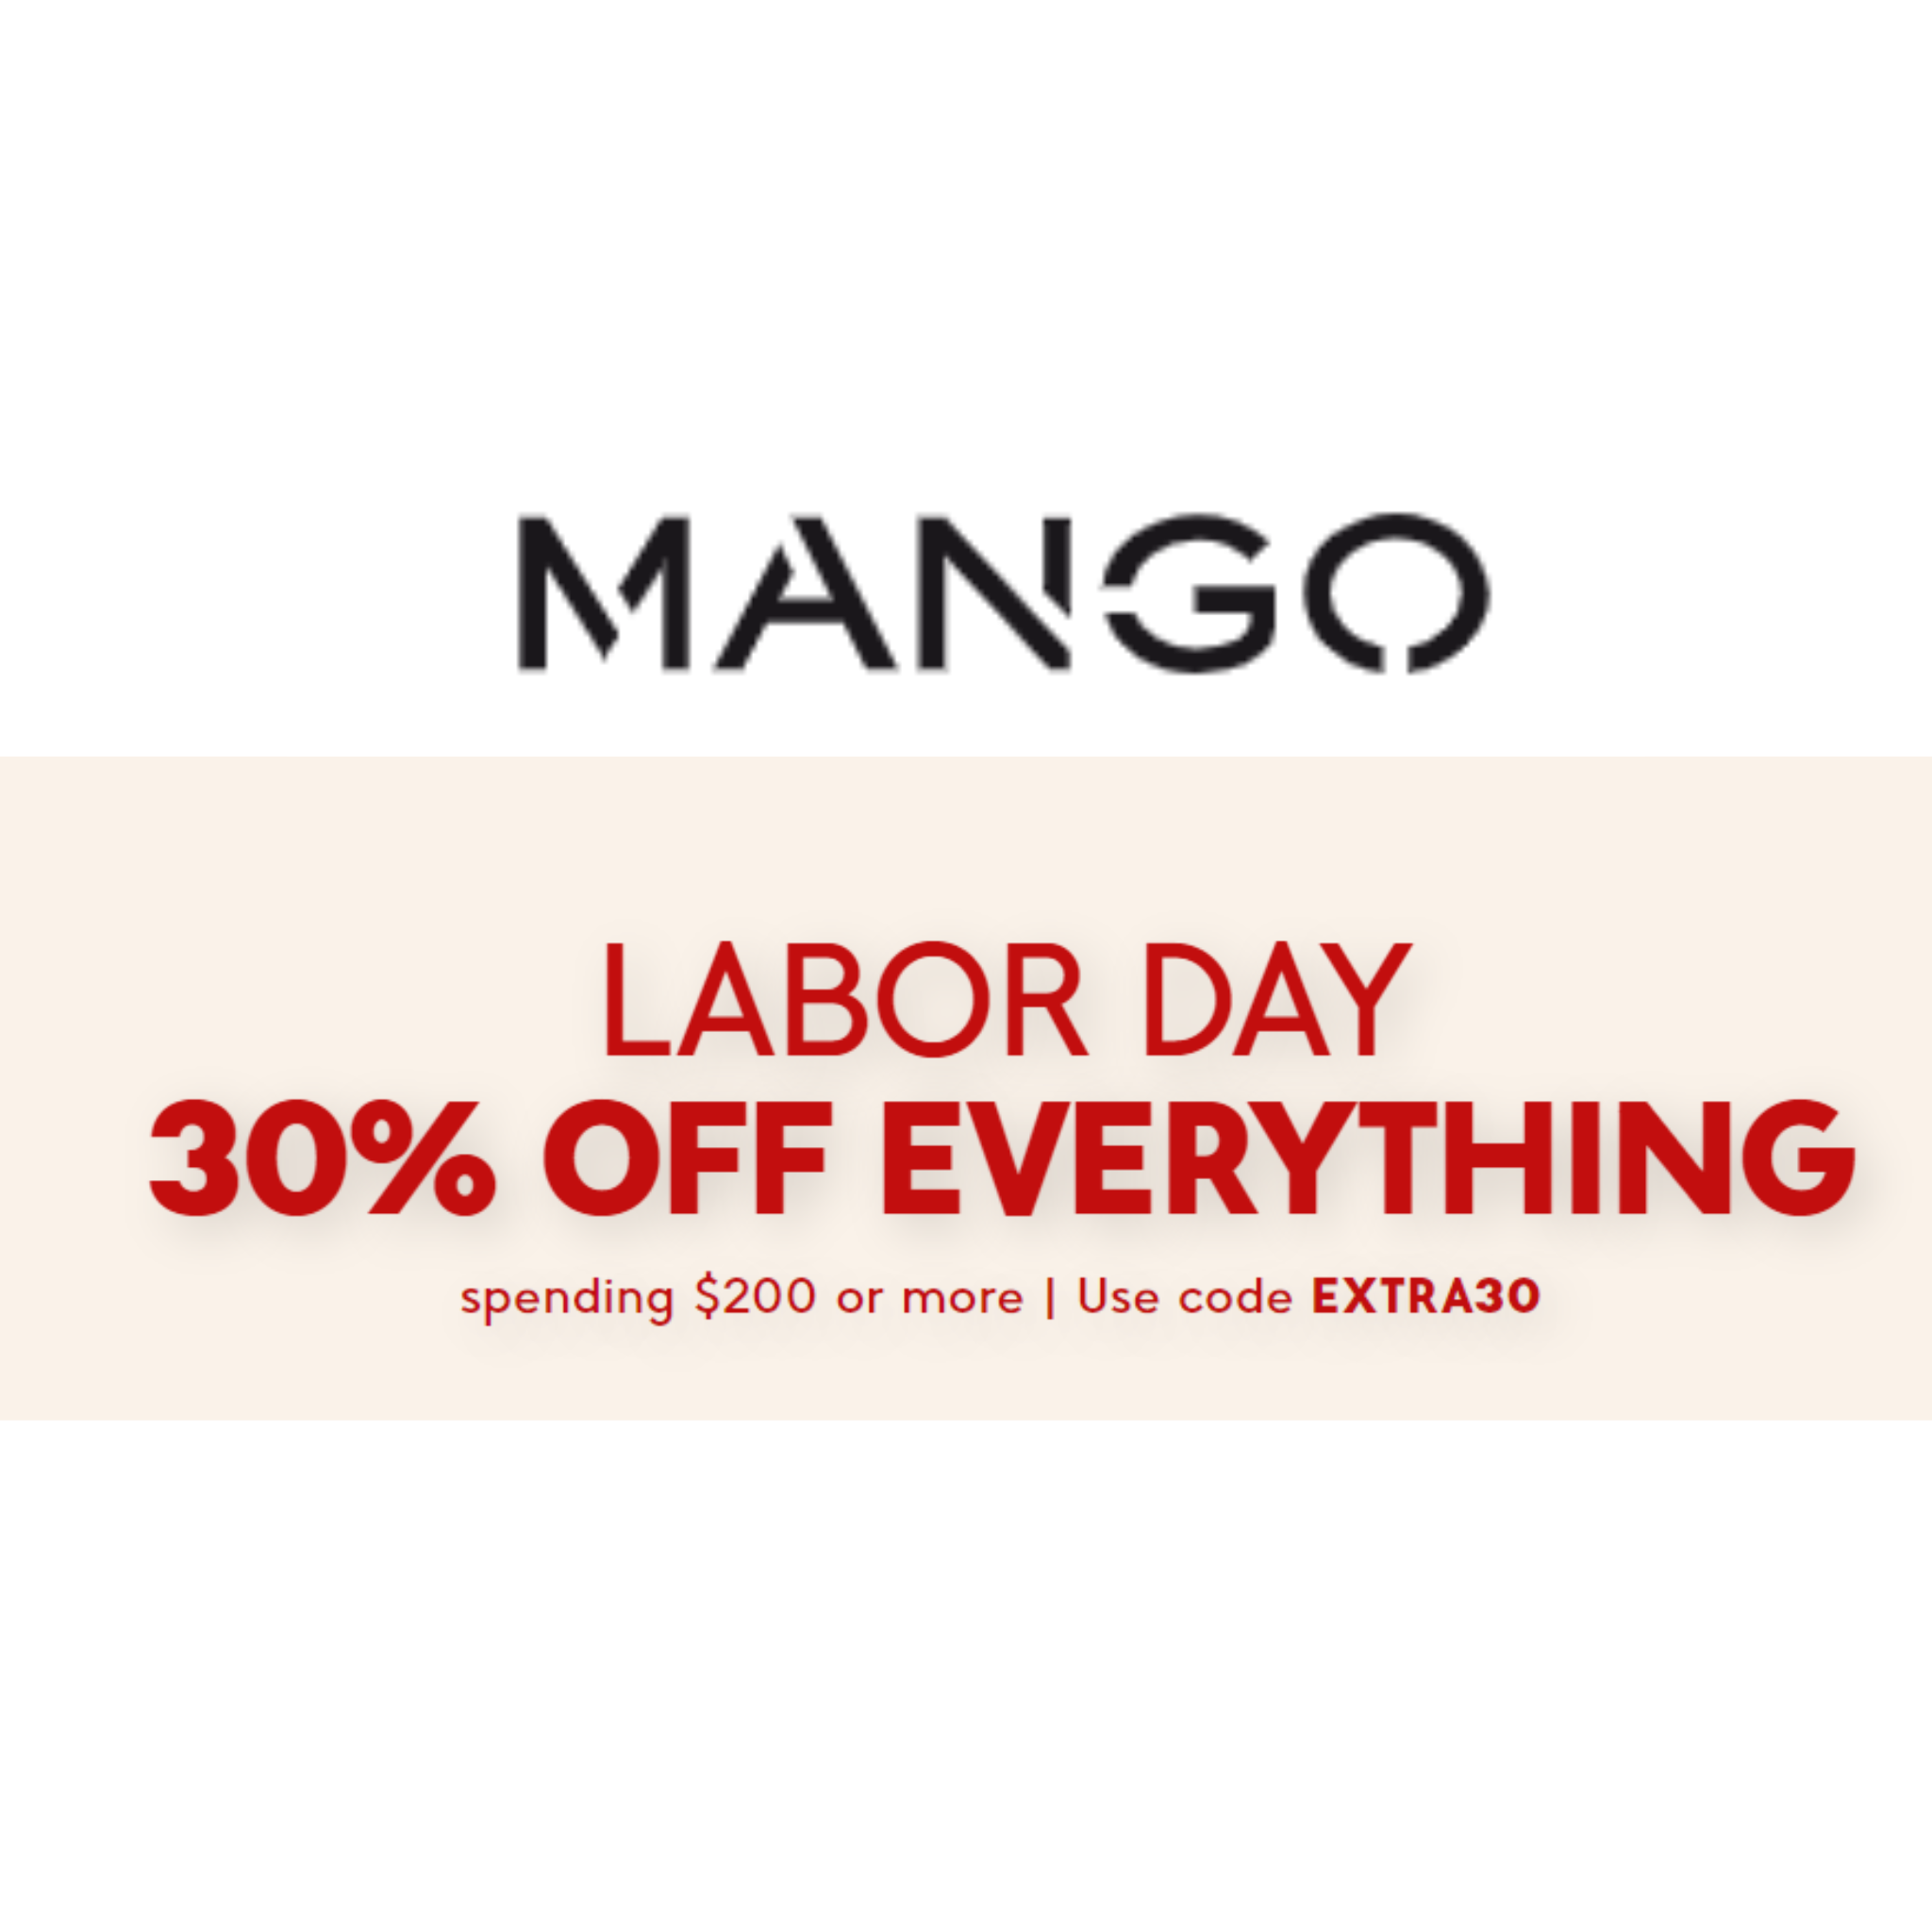 Mango Labor Day Event- 30% OFF EVERYTHING!